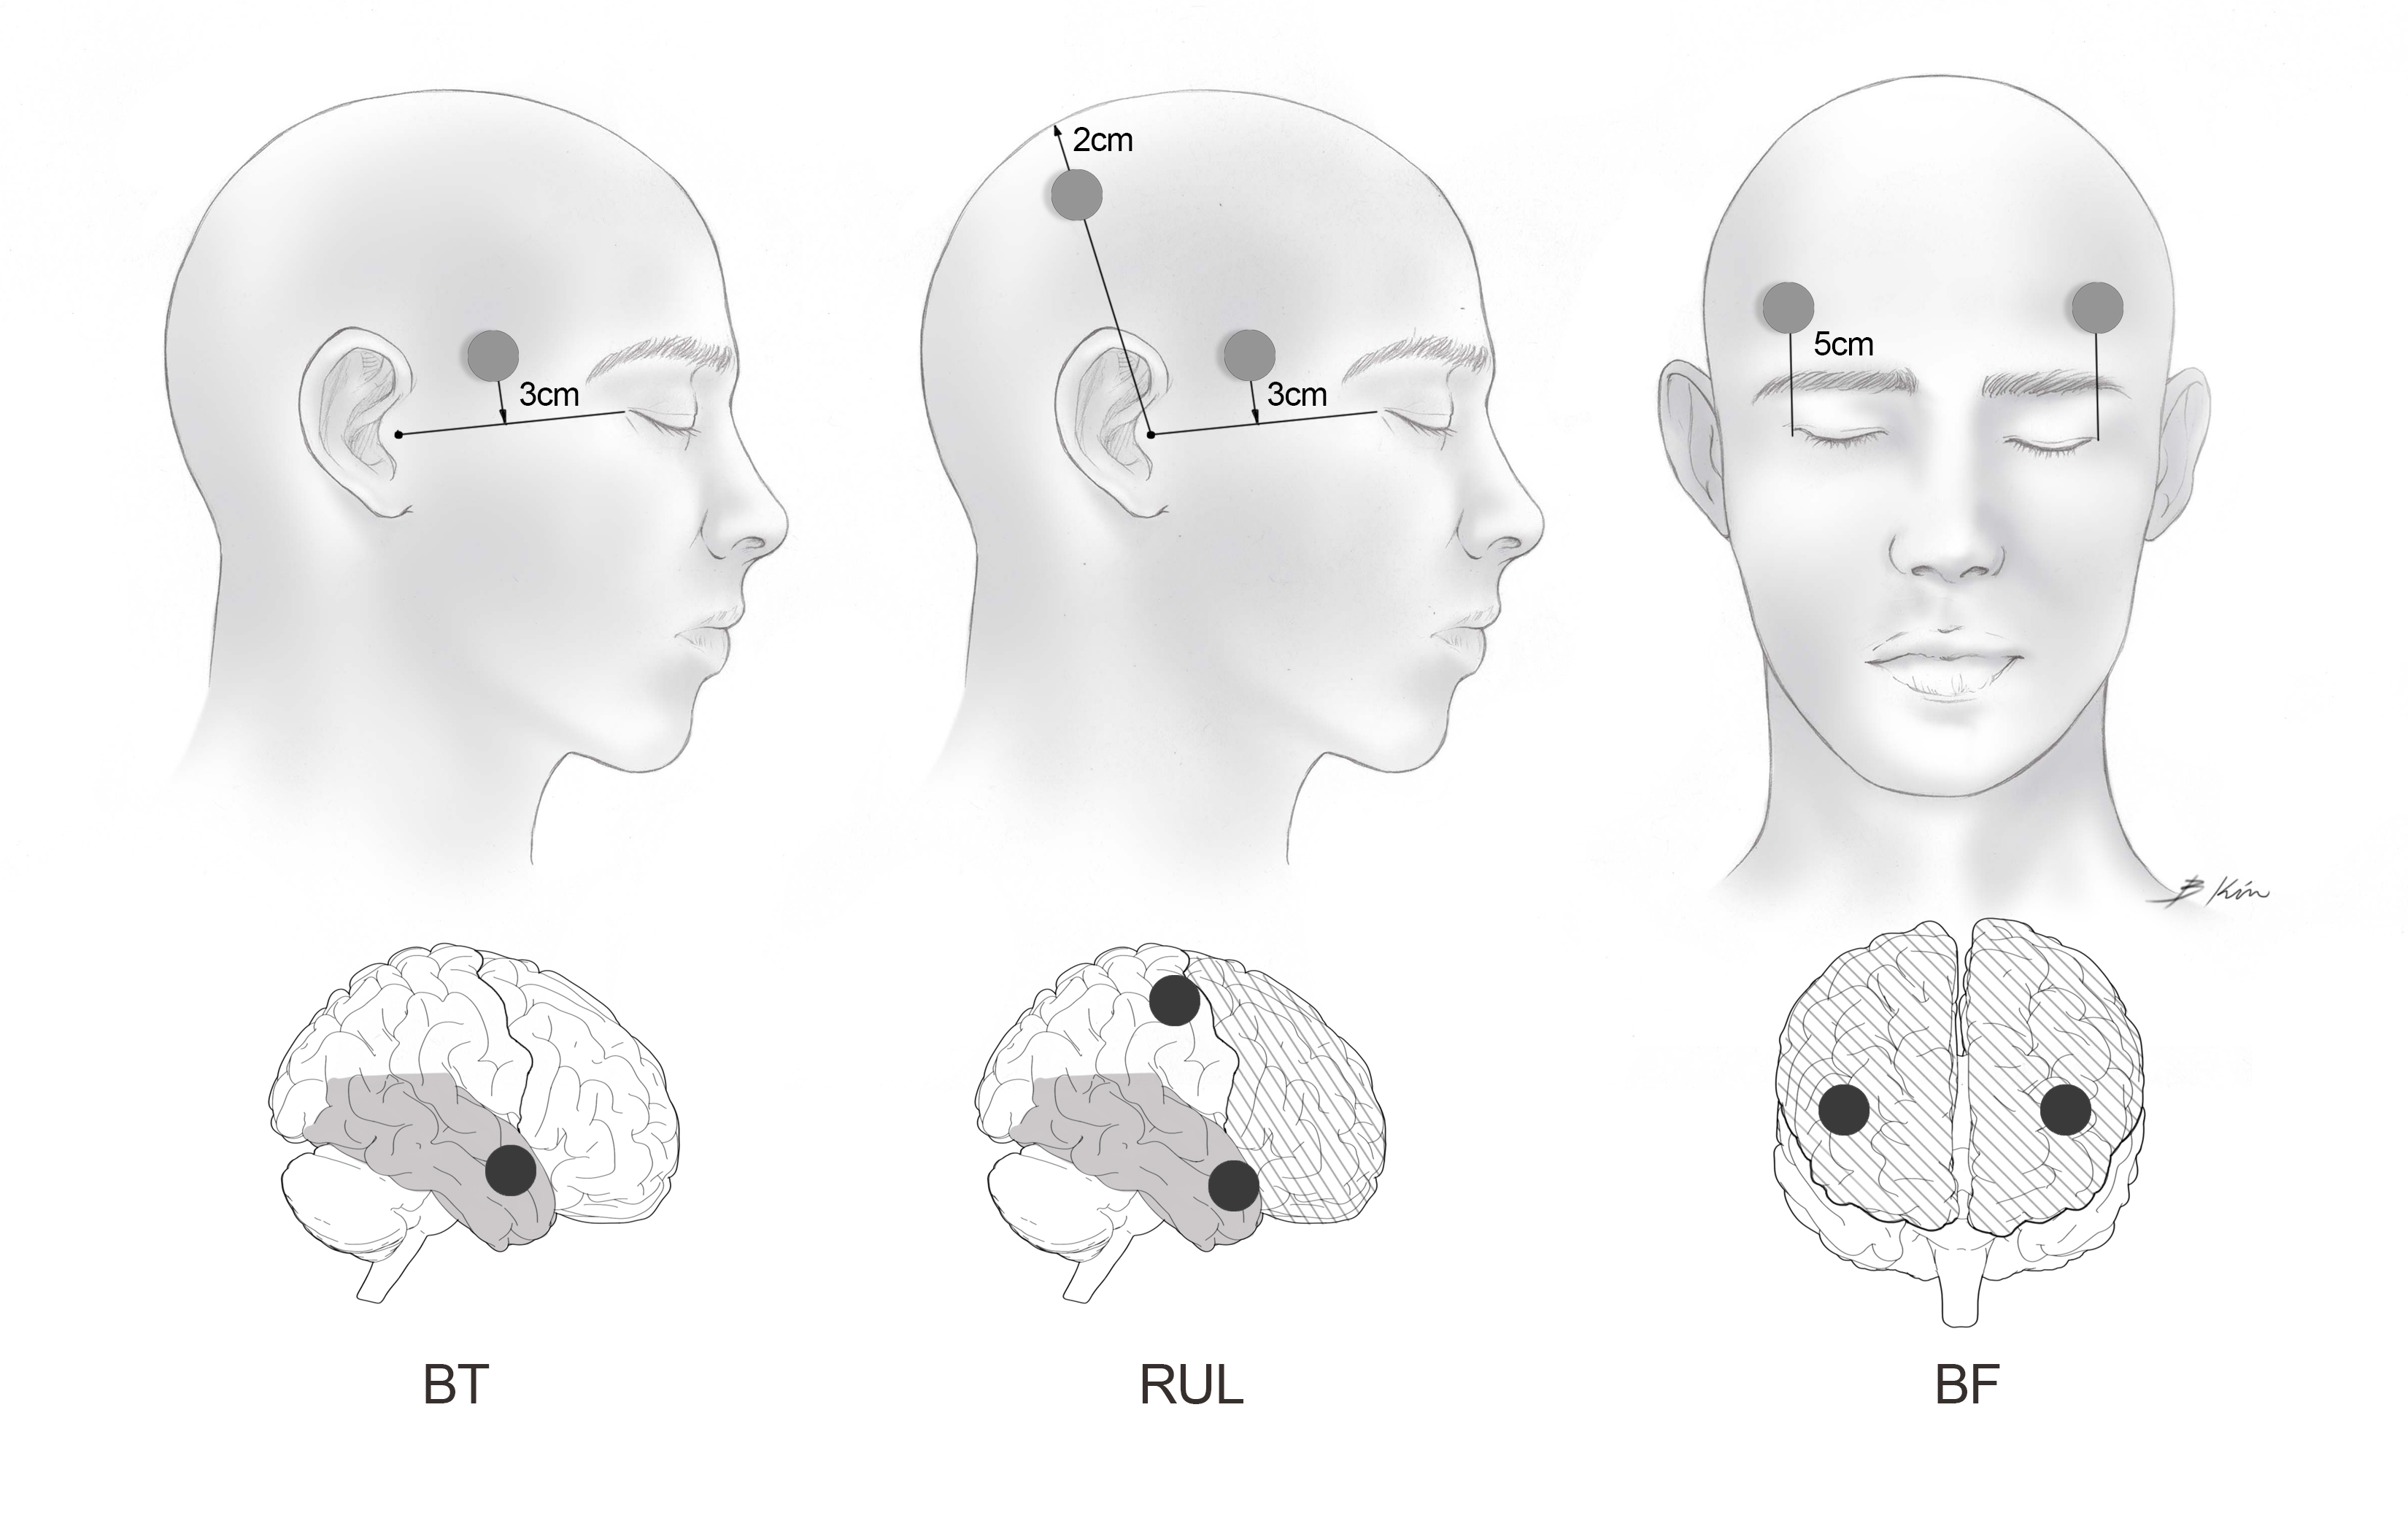 Three neurosurgery illustrations depicting various craniotomy sites and measurements to allow the surgeon to gain access to different parts of the brain based on surface anatomy